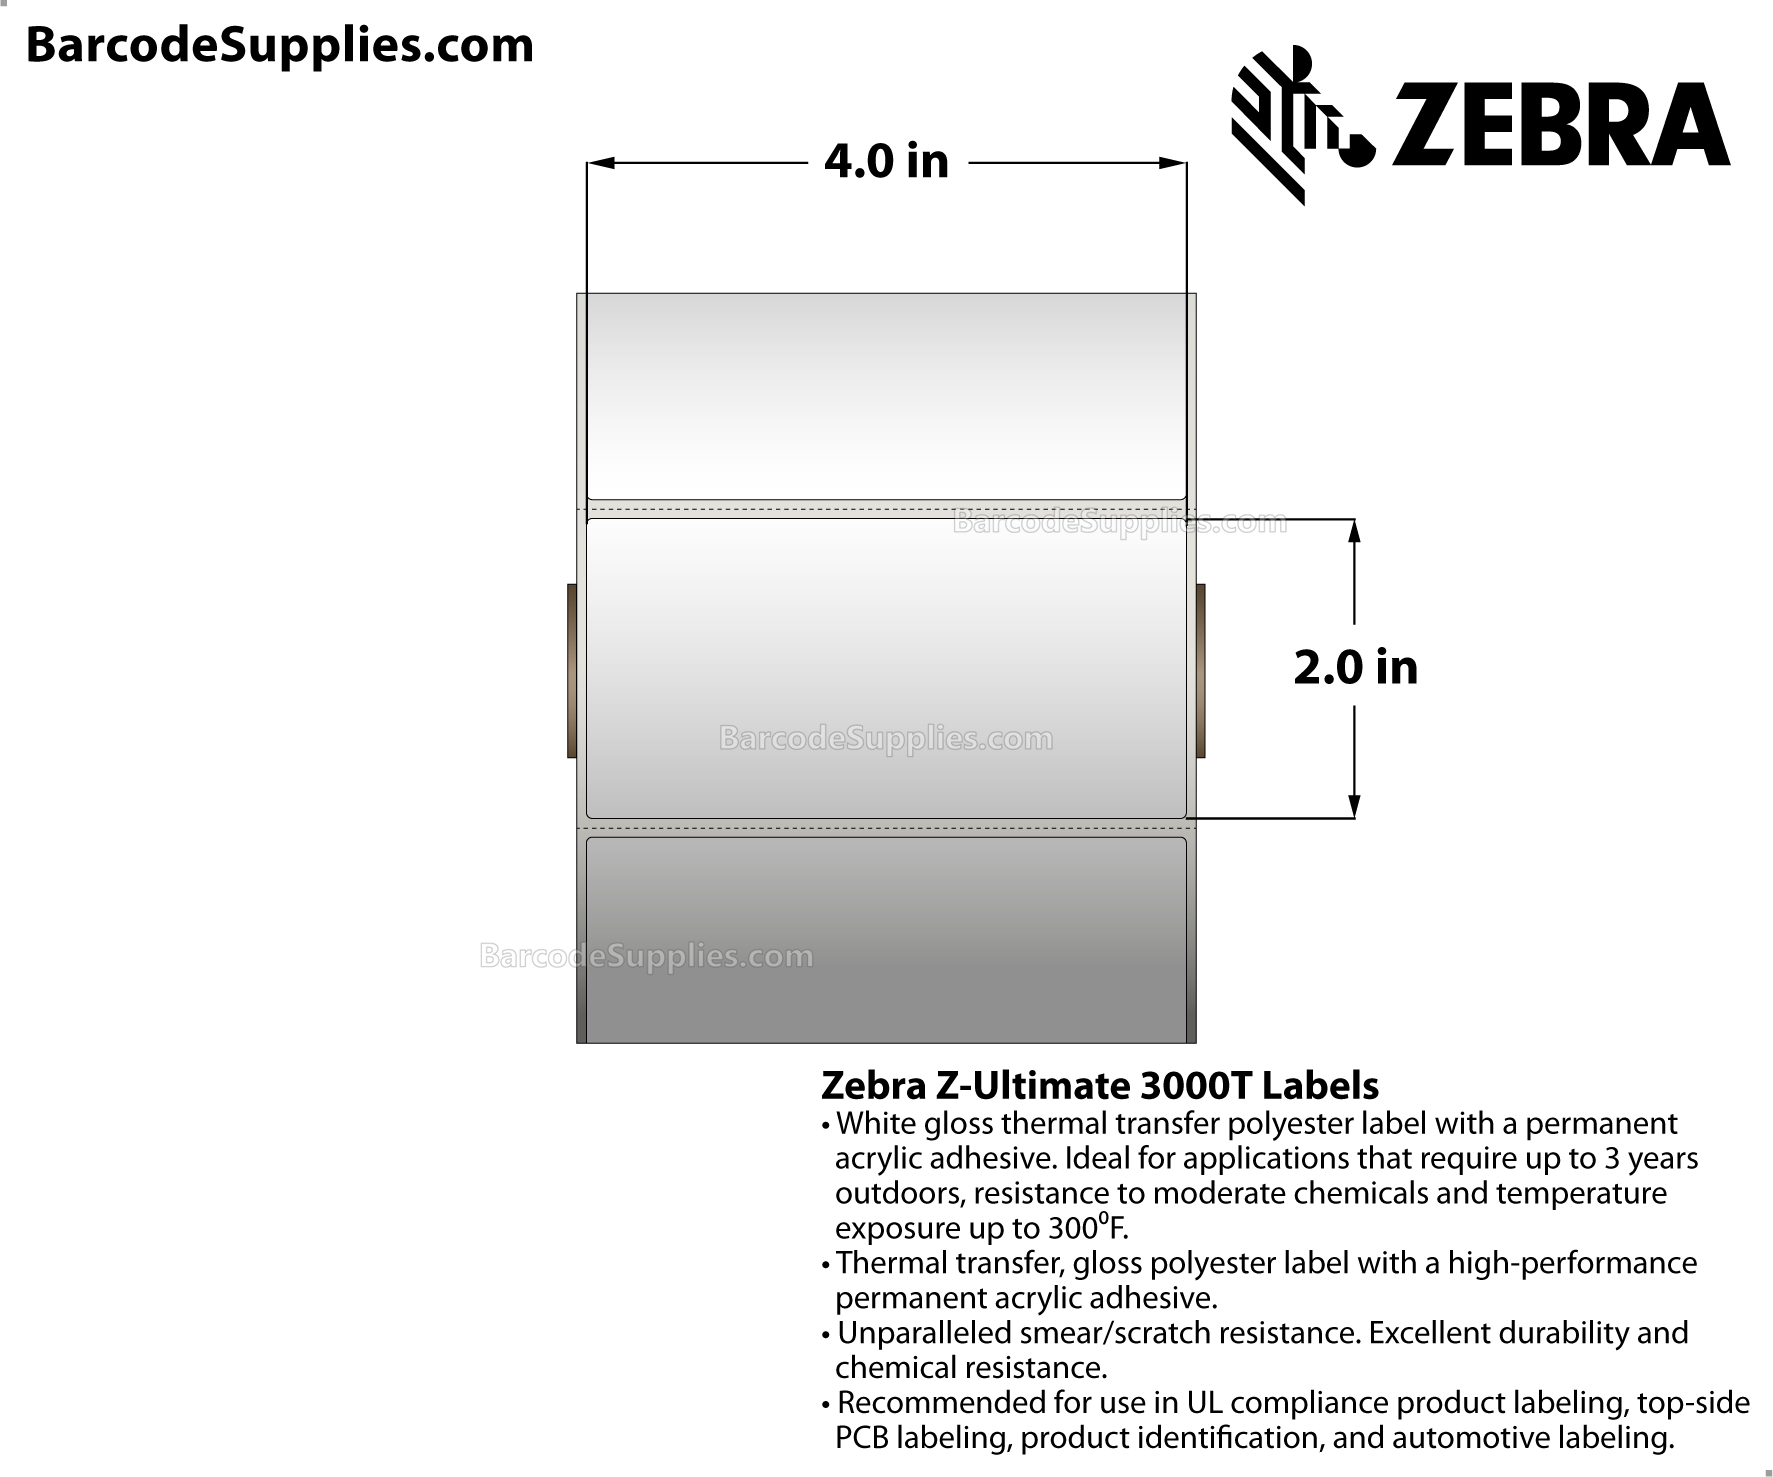 4 x 2 Thermal Transfer White Z-Ultimate 3000T Labels With Permanent Adhesive - Perforated - 1340 Labels Per Roll - Carton Of 4 Rolls - 5360 Labels Total - MPN: 18950